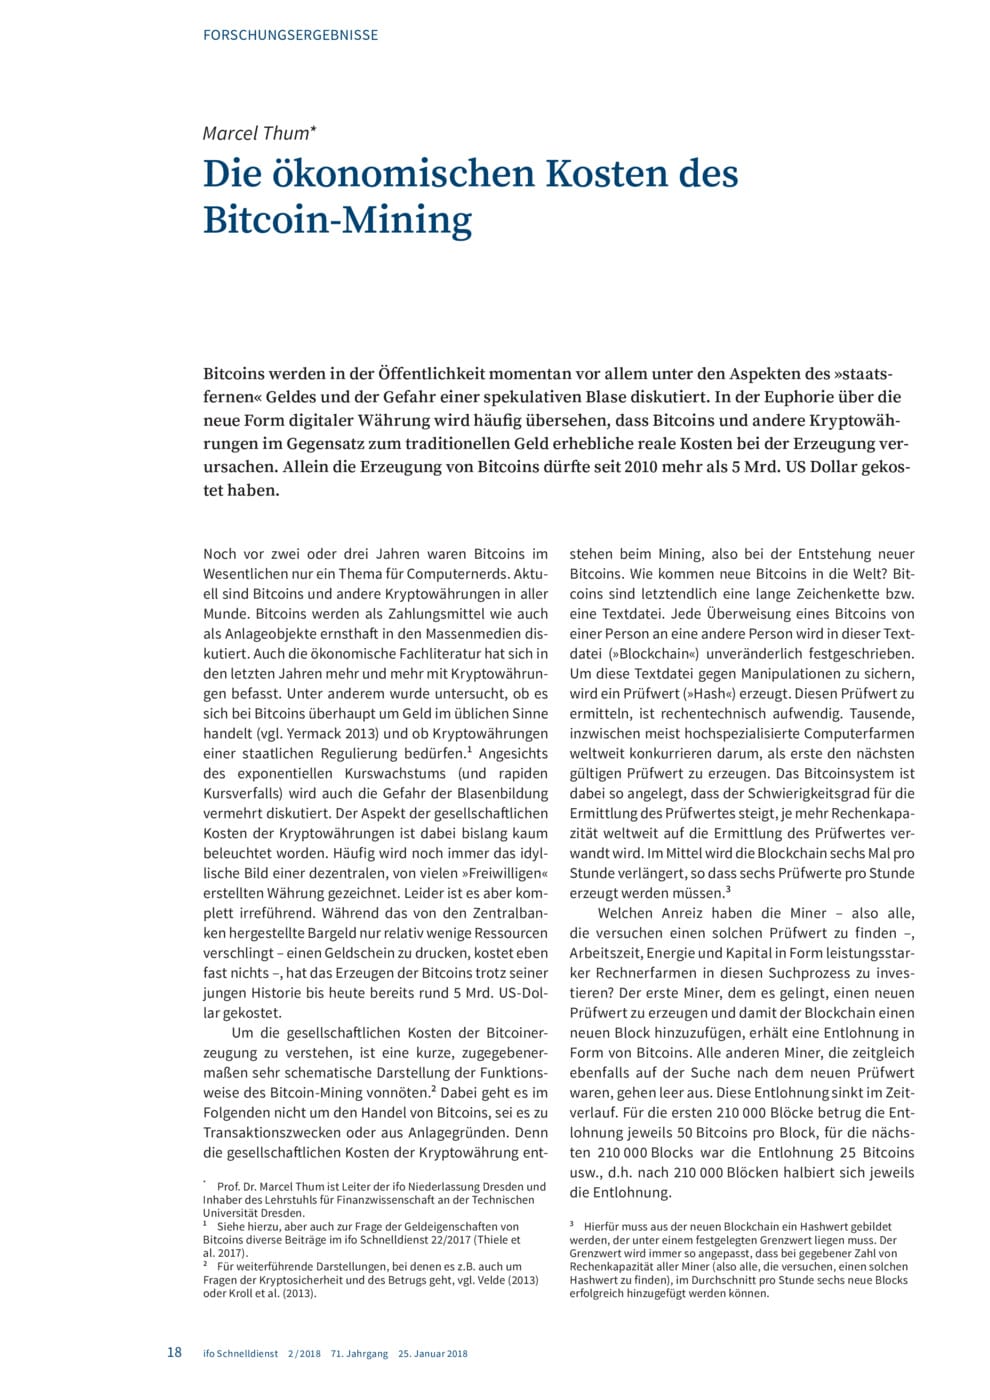 Bitcoin Mining And Its Economic Costs Ifo Institut - 